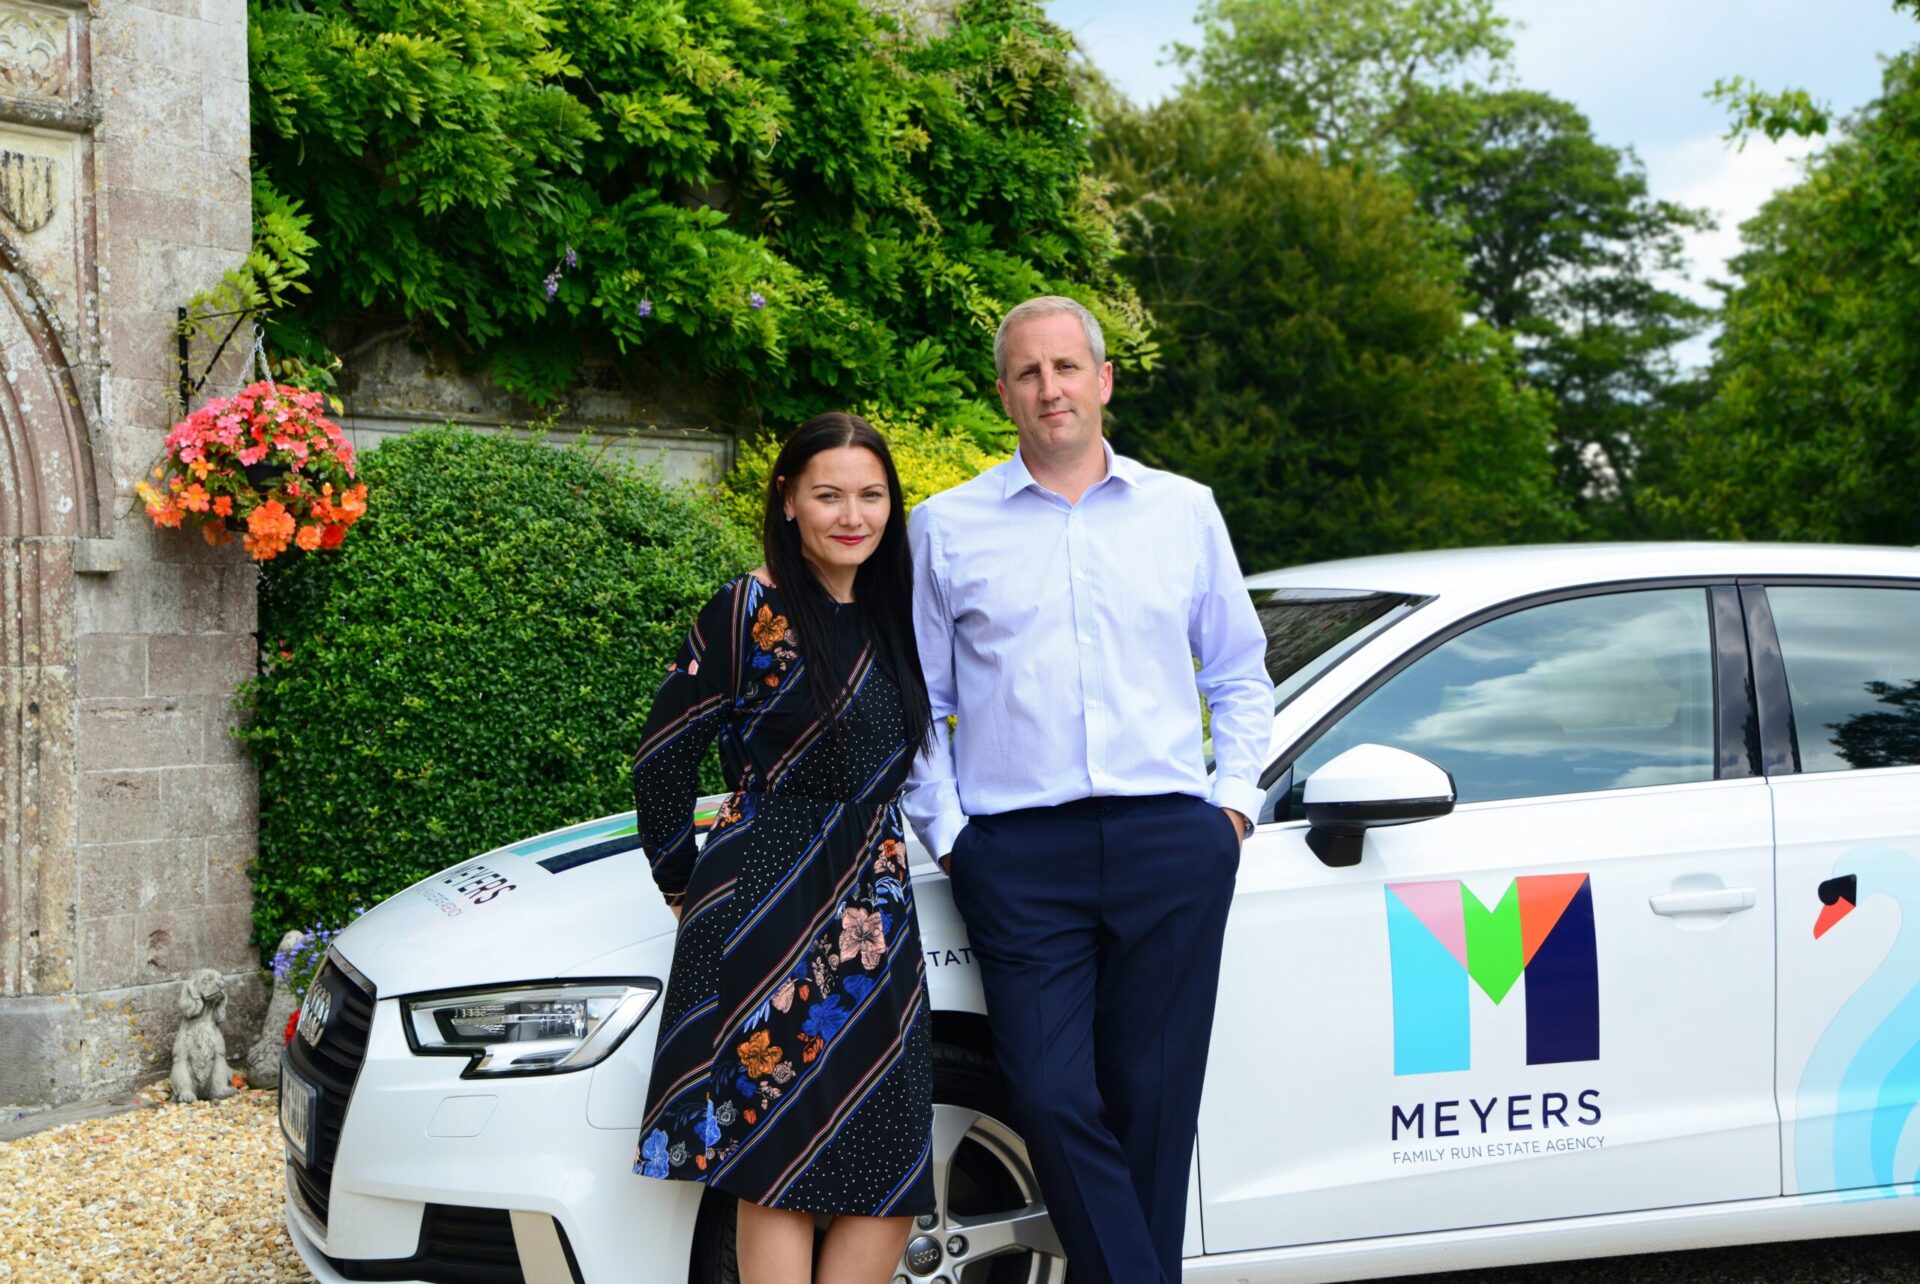 Meyers Estate Agents’ franchisees Richard White and his partner Claire – Q&A